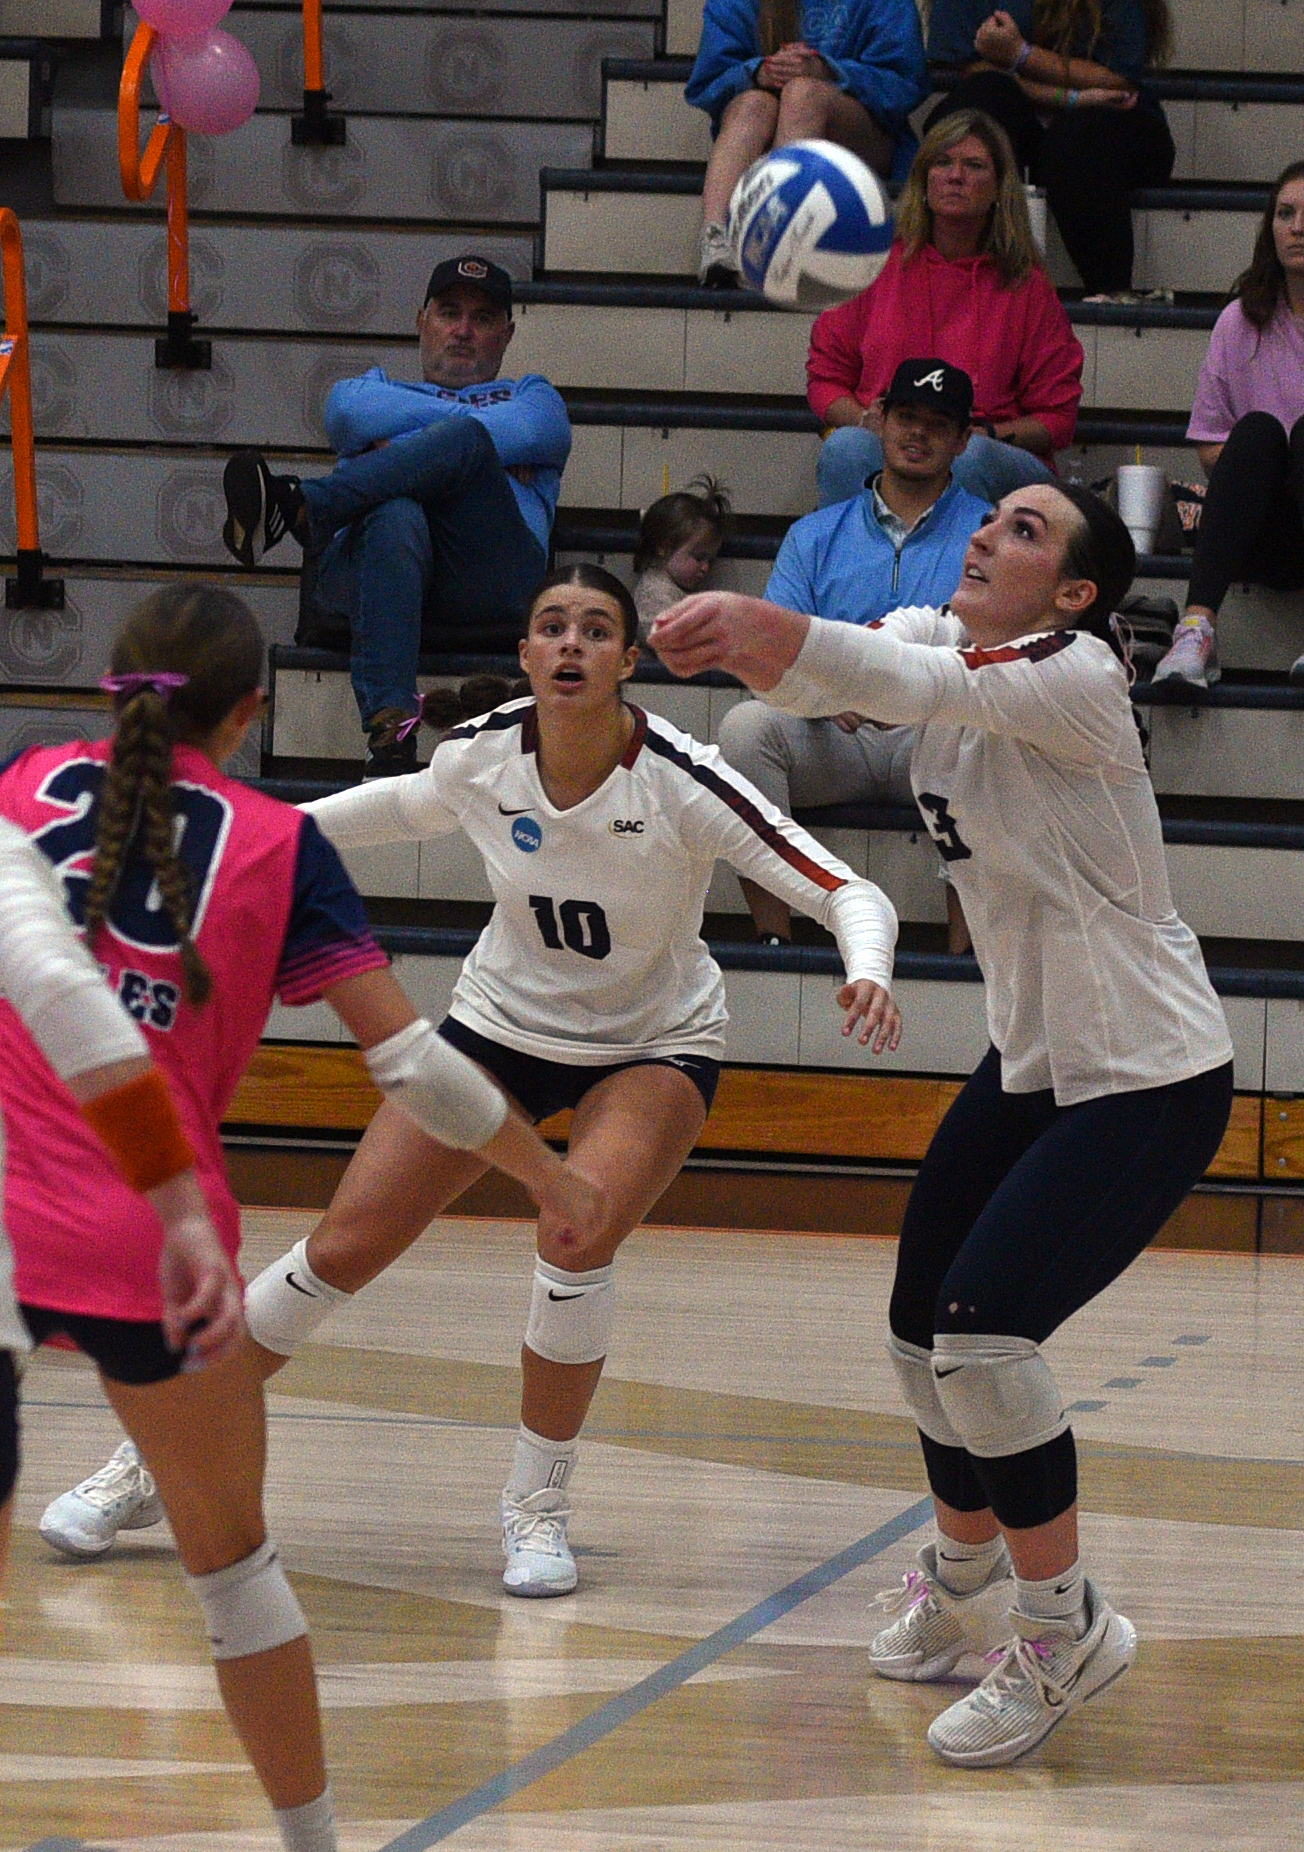 Eagles falter in straight sets to the Pioneers